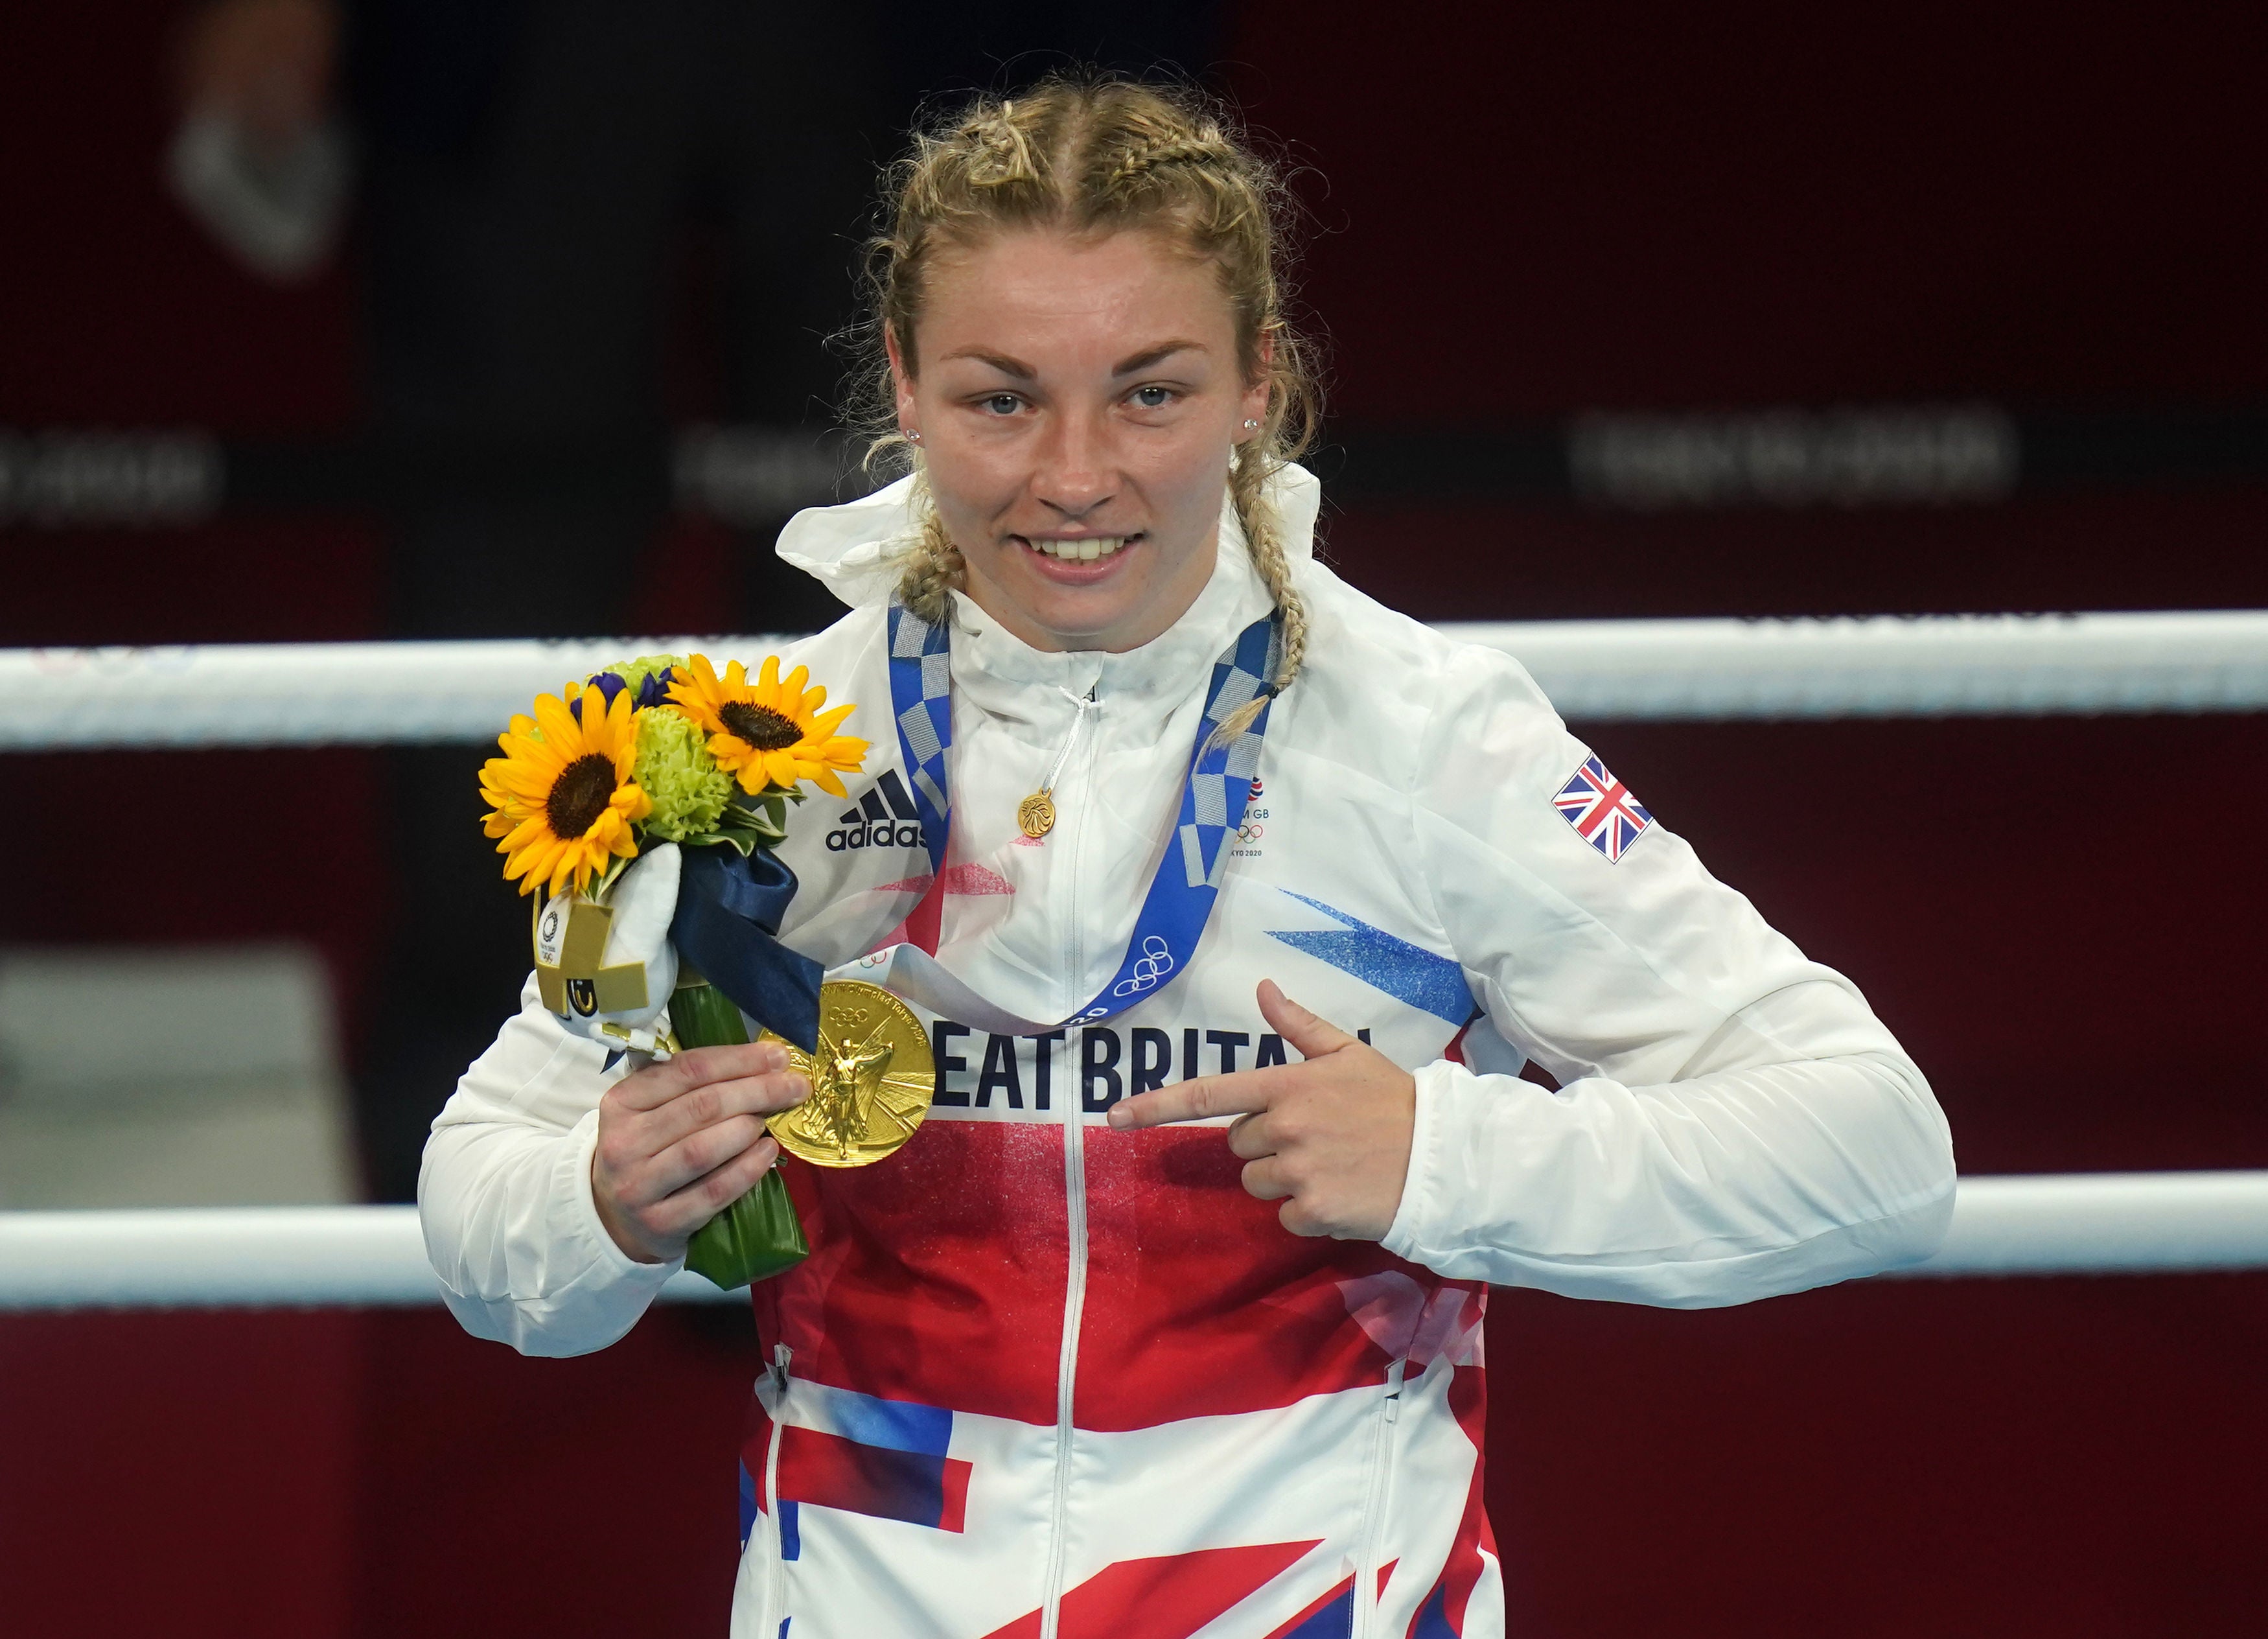 Rosie Eccles is hopiung to emulate compatriot Lauren Price, who won Olympic gold in Tokyo